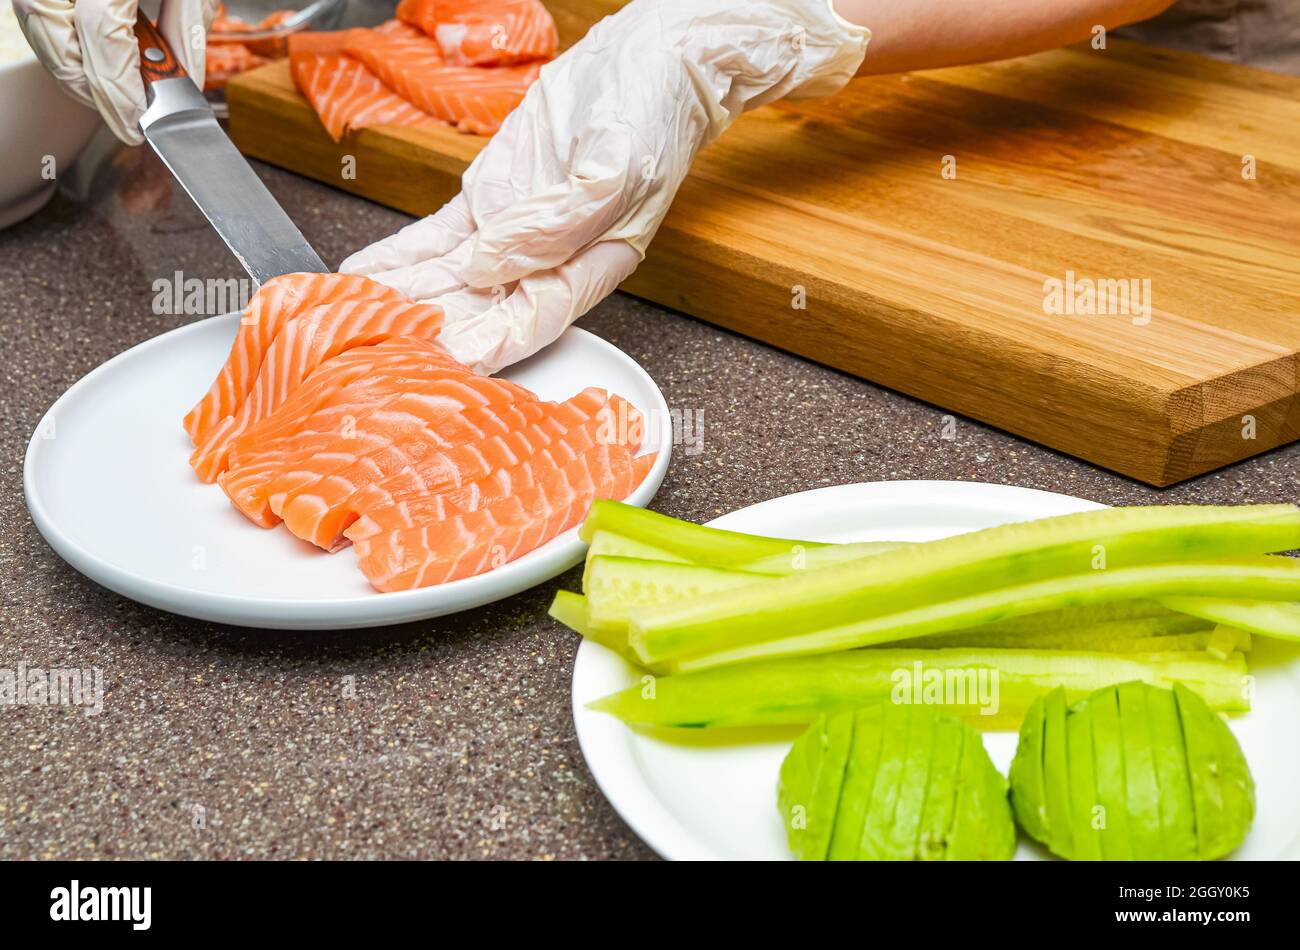 Chef's hands close up. On a wooden cutting board, the chef cuts a red fish with a knife. Stock Photo